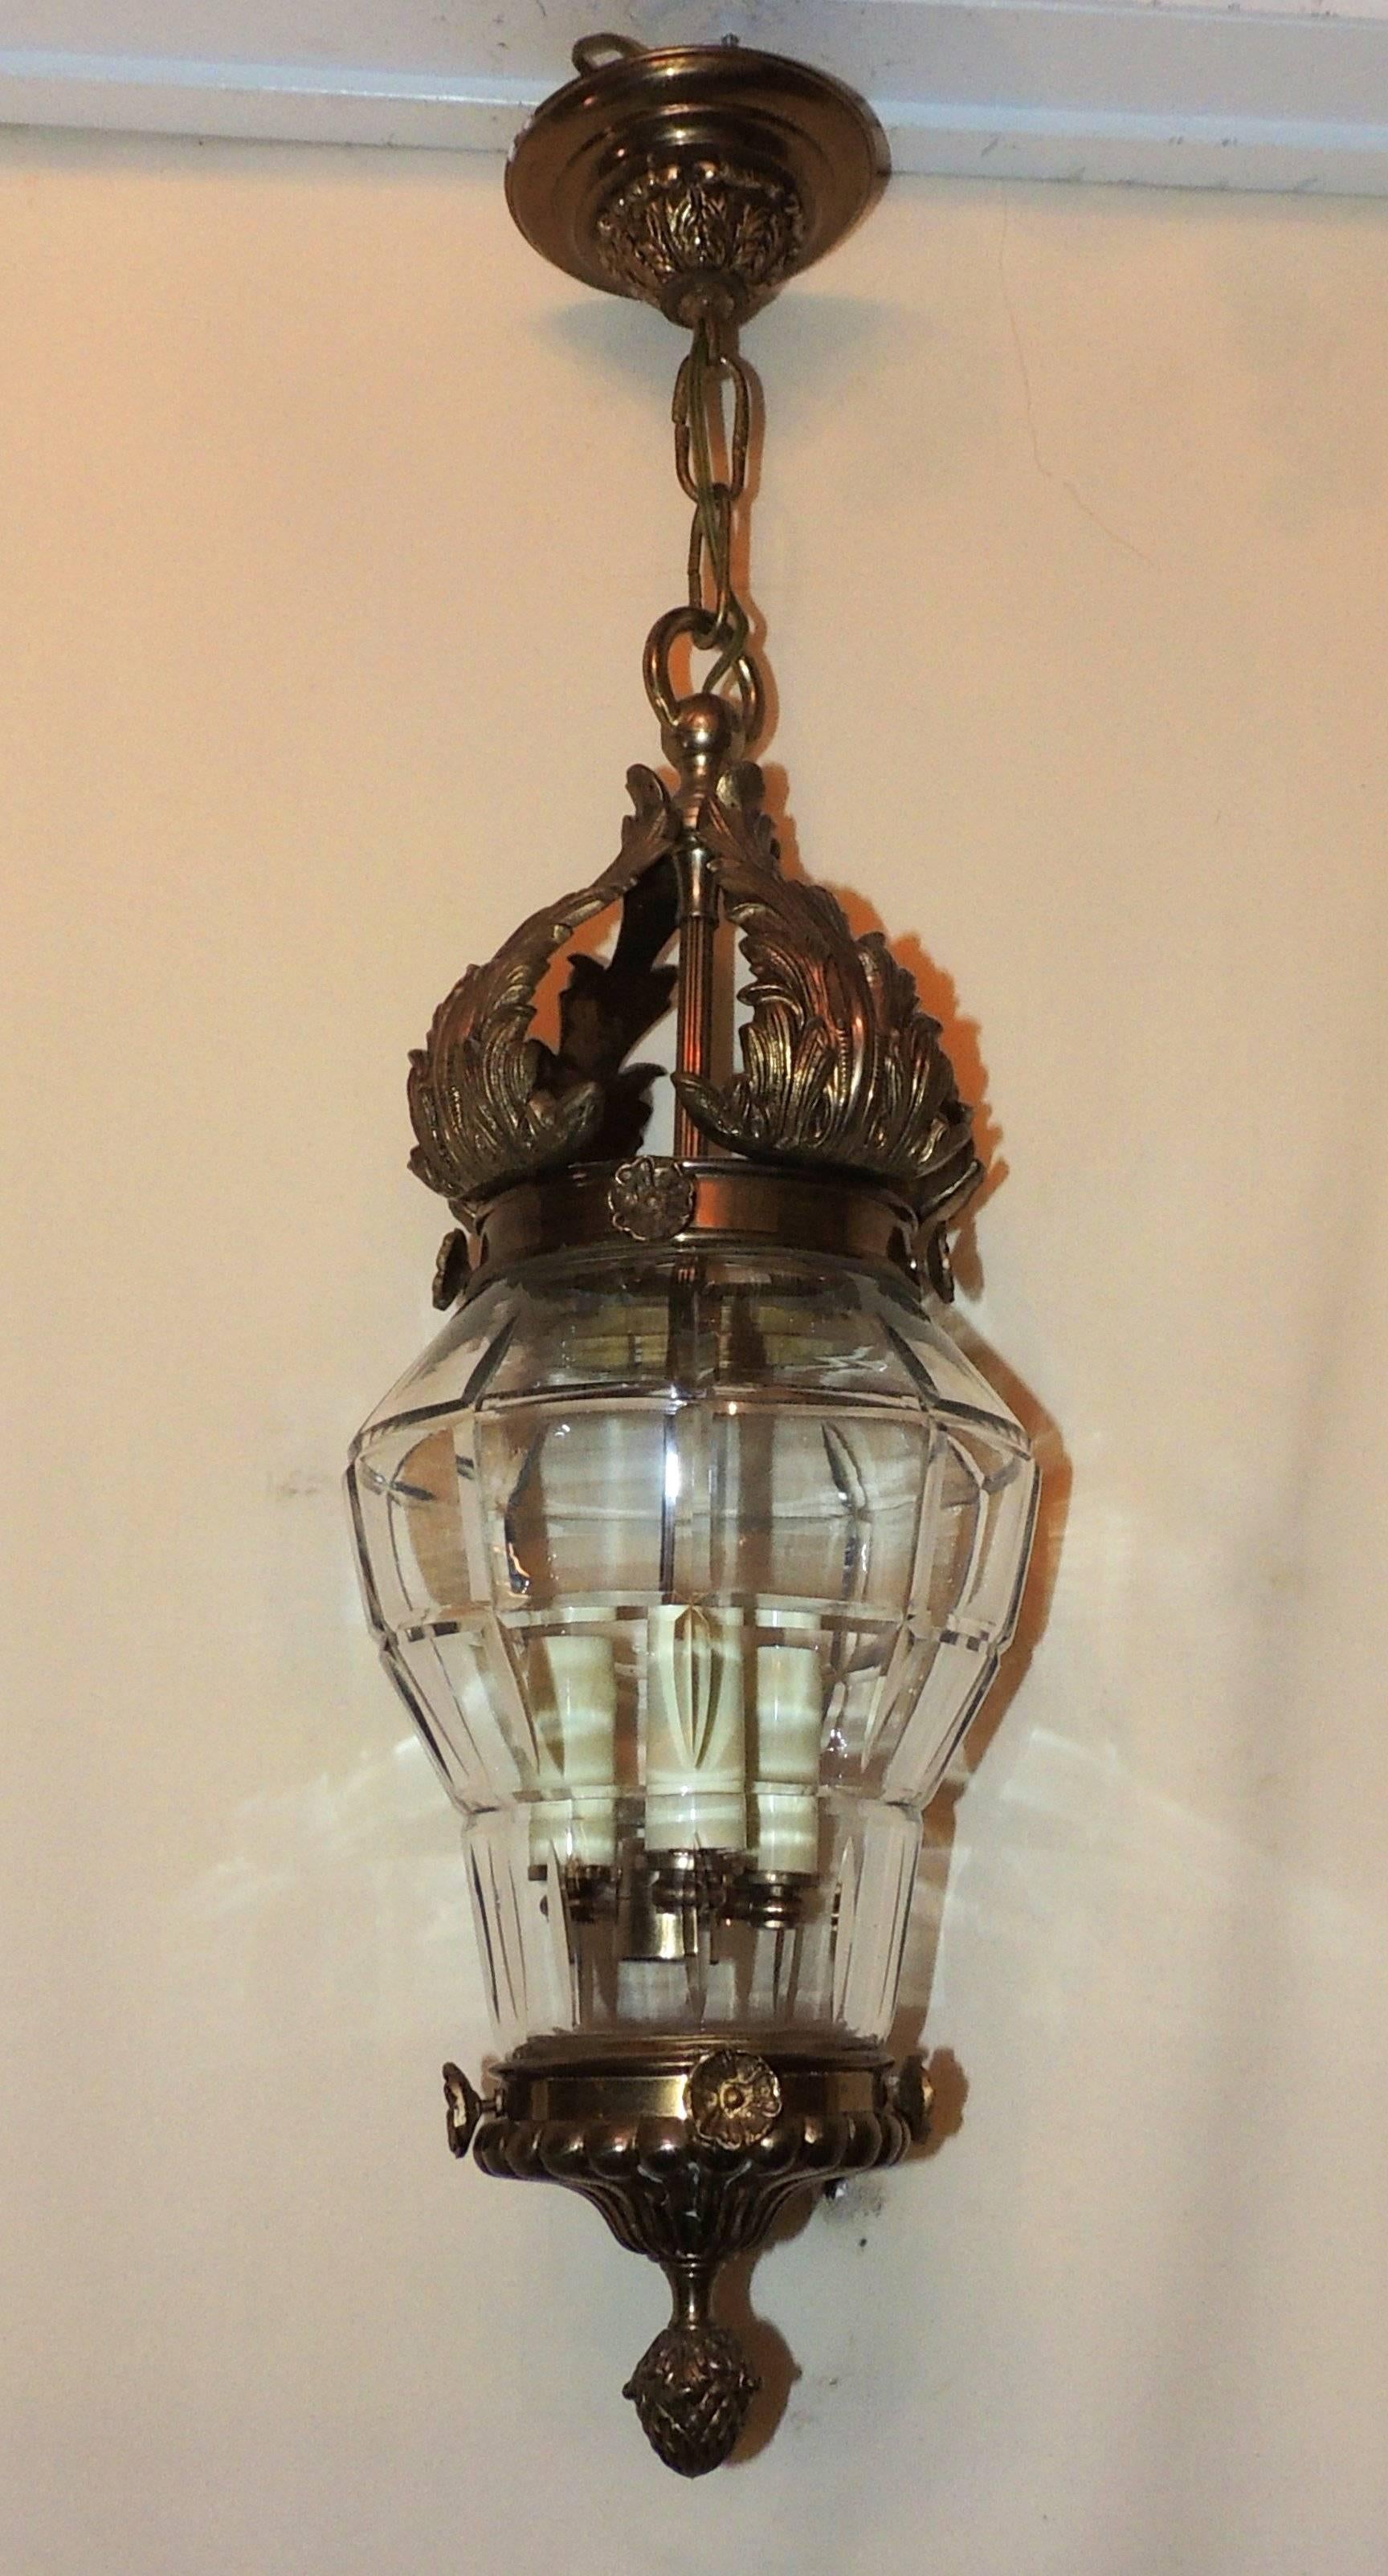 Wonderful French bronze filigree beveled panel glass lantern chandelier fixture with three lights.

Measures: 20" H x 10" W.